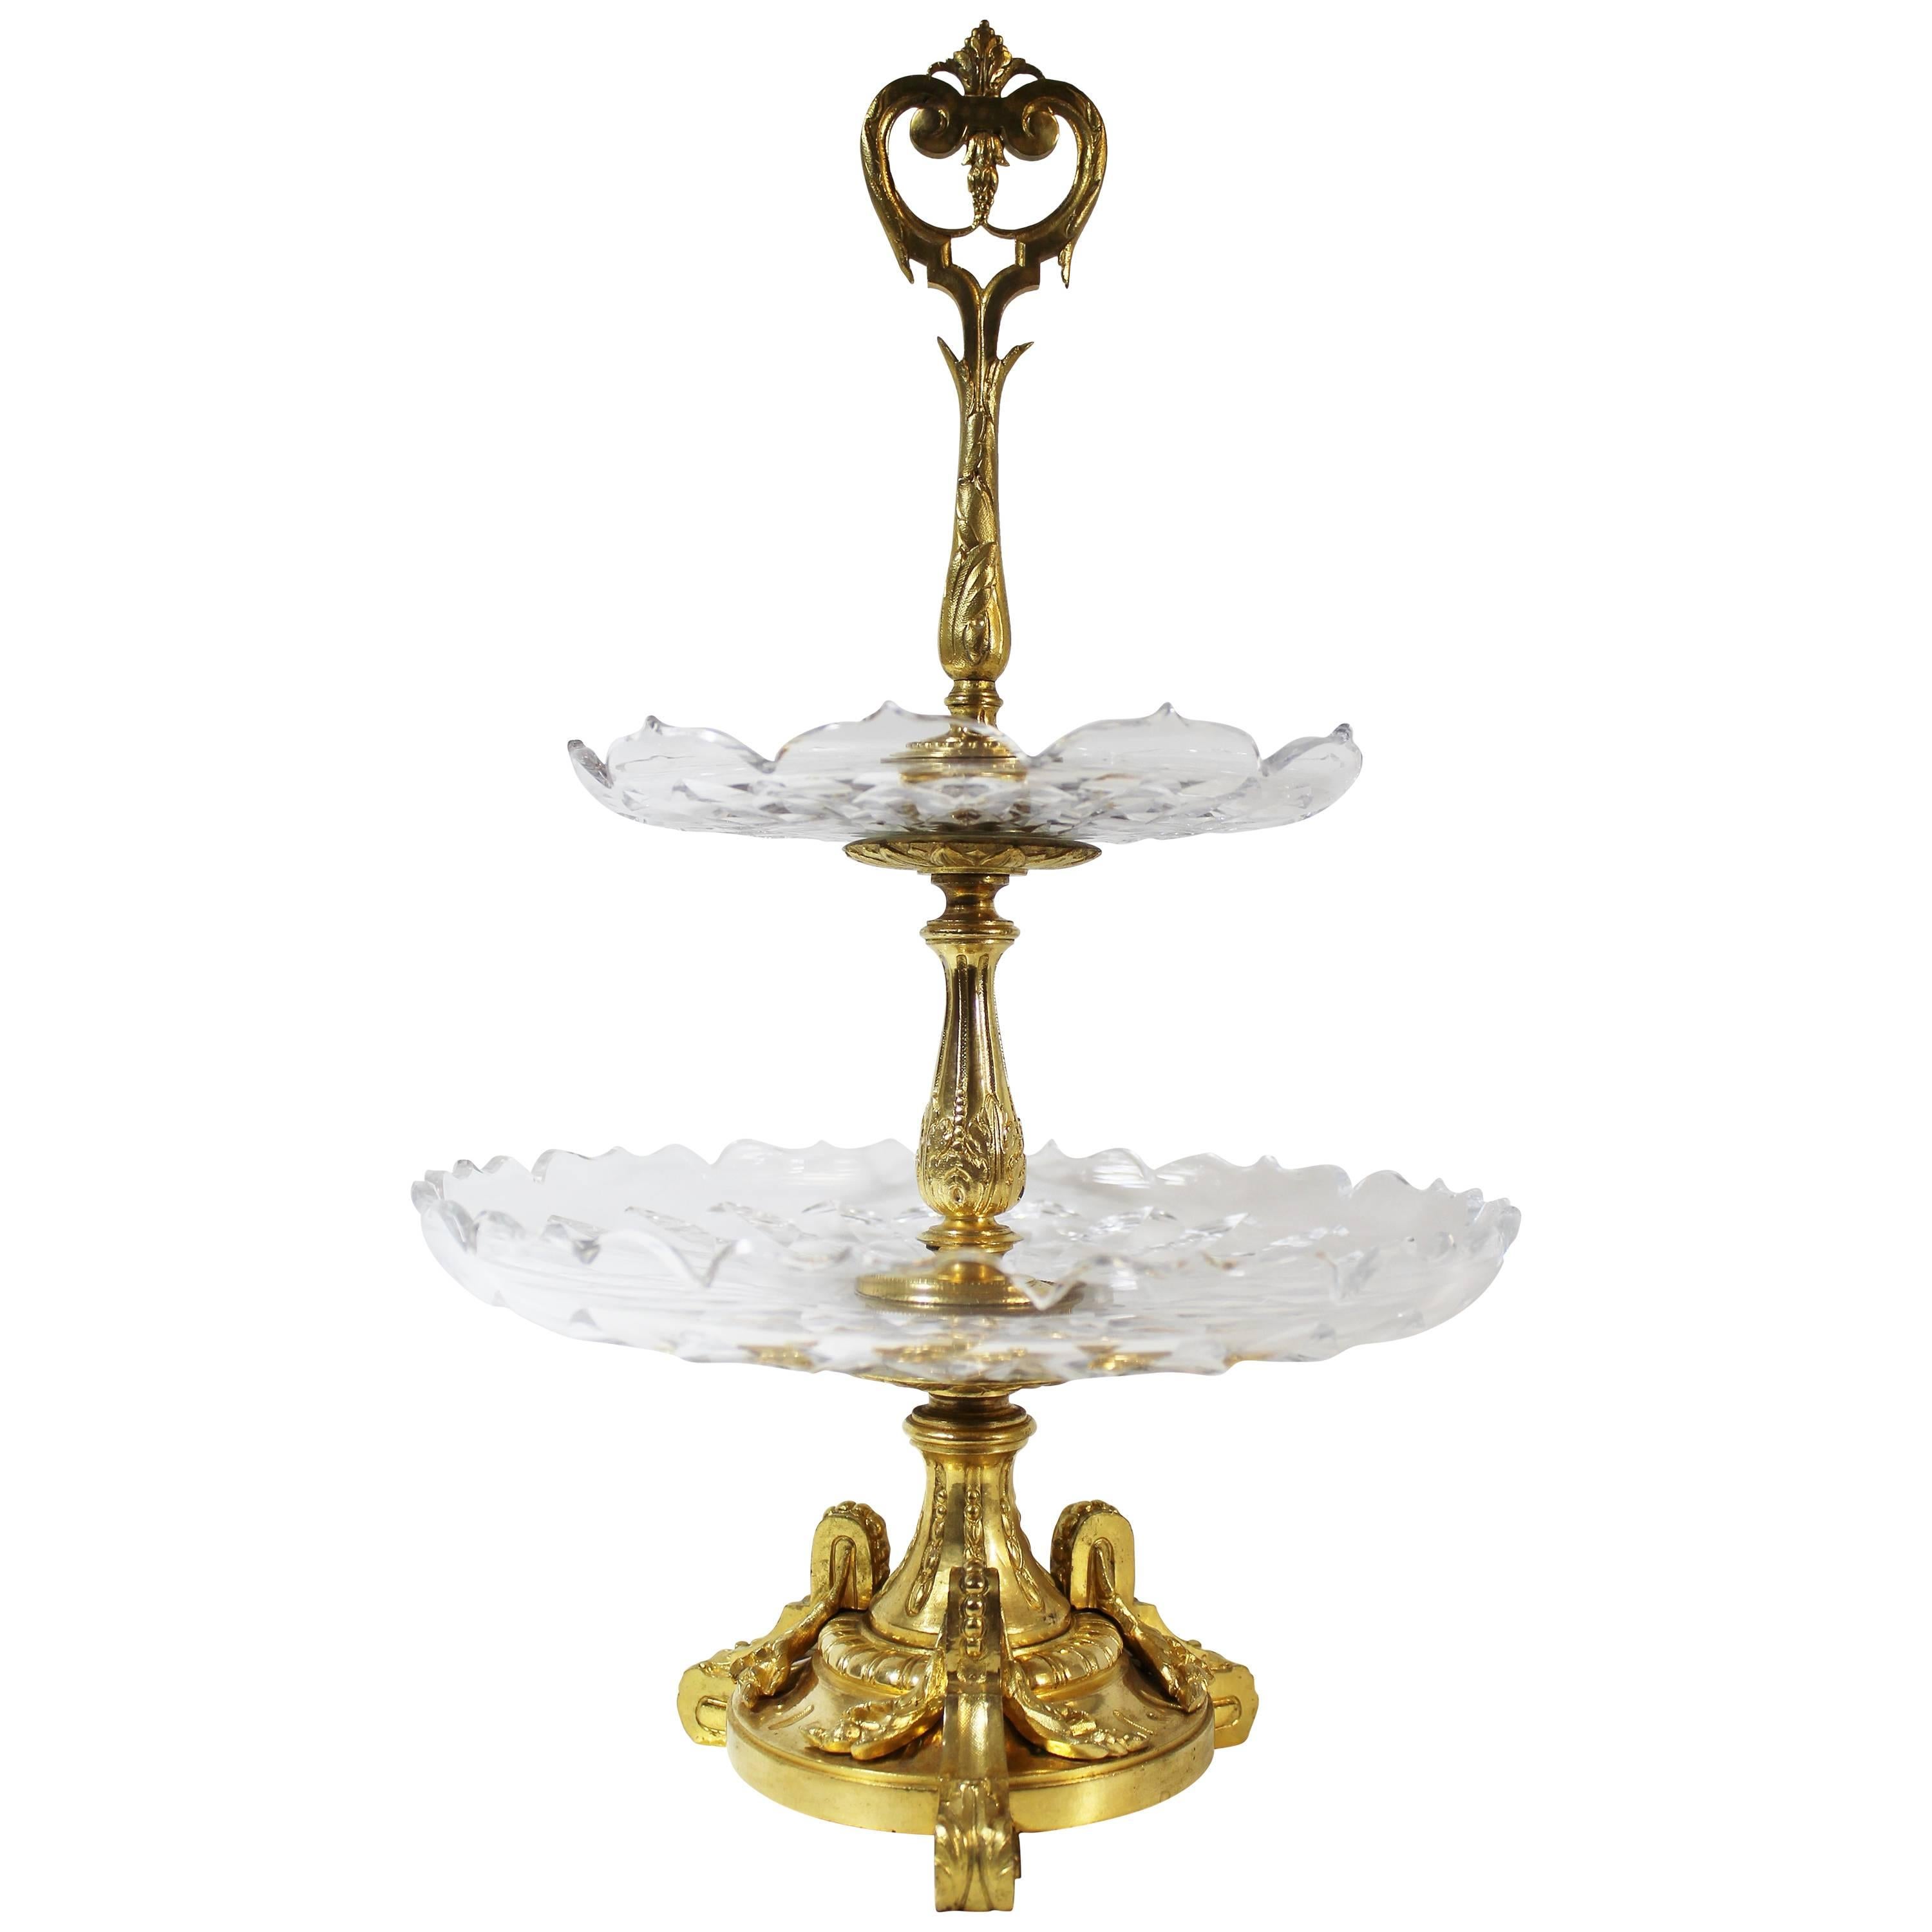 French Gilt Bronze & Cut Crystal Two-Tier Surtout De Table or Centerpiece Tazza For Sale